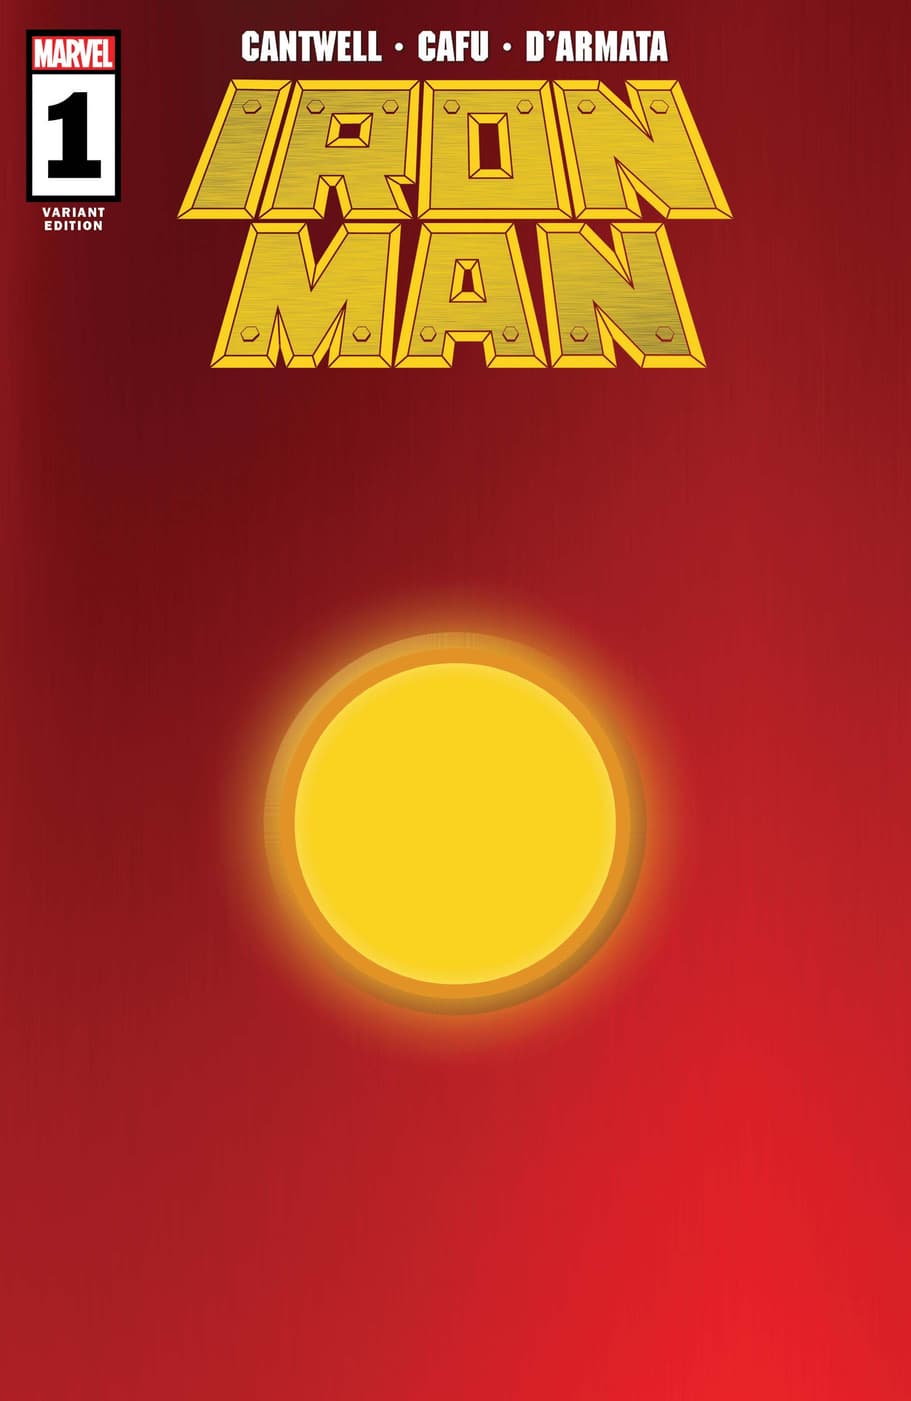 IRON MAN #1 variant cover